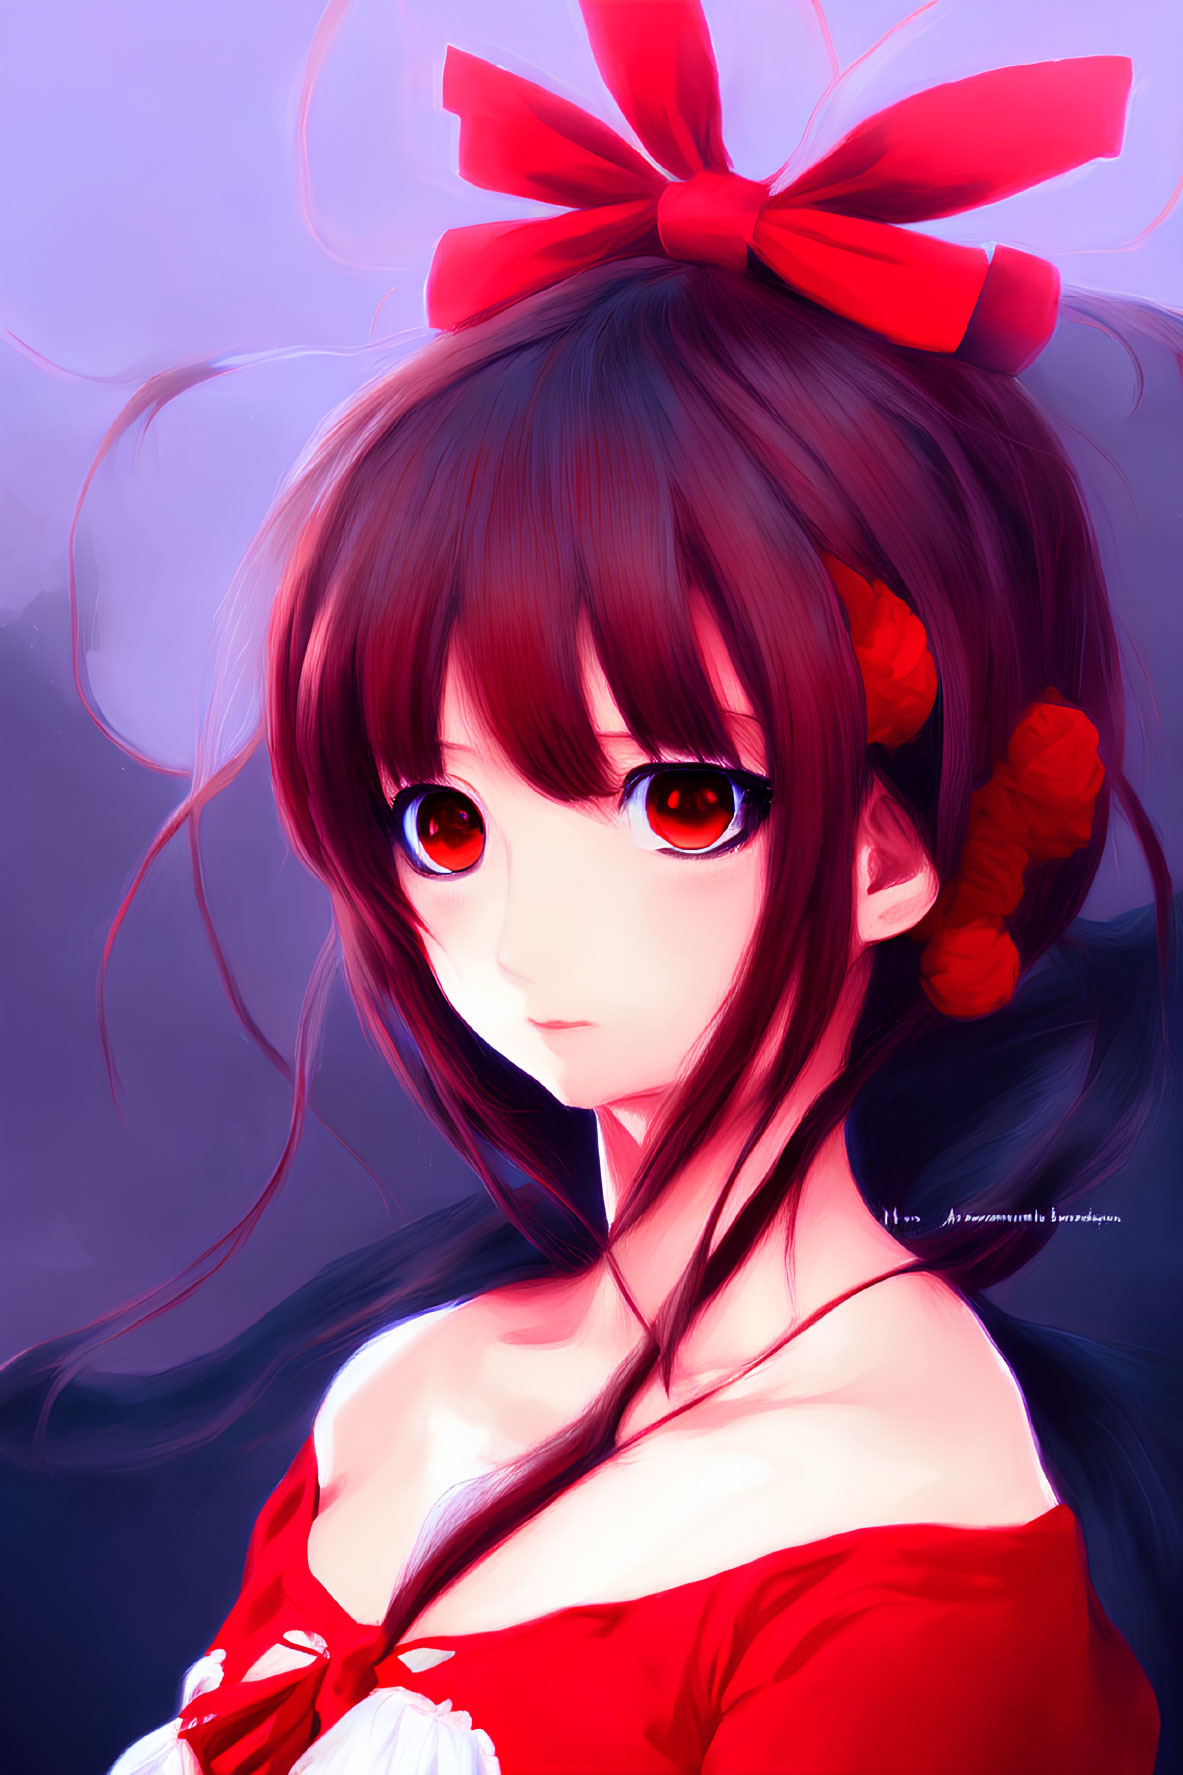 Anime girl with large red eyes and brown hair in red outfit on purple background